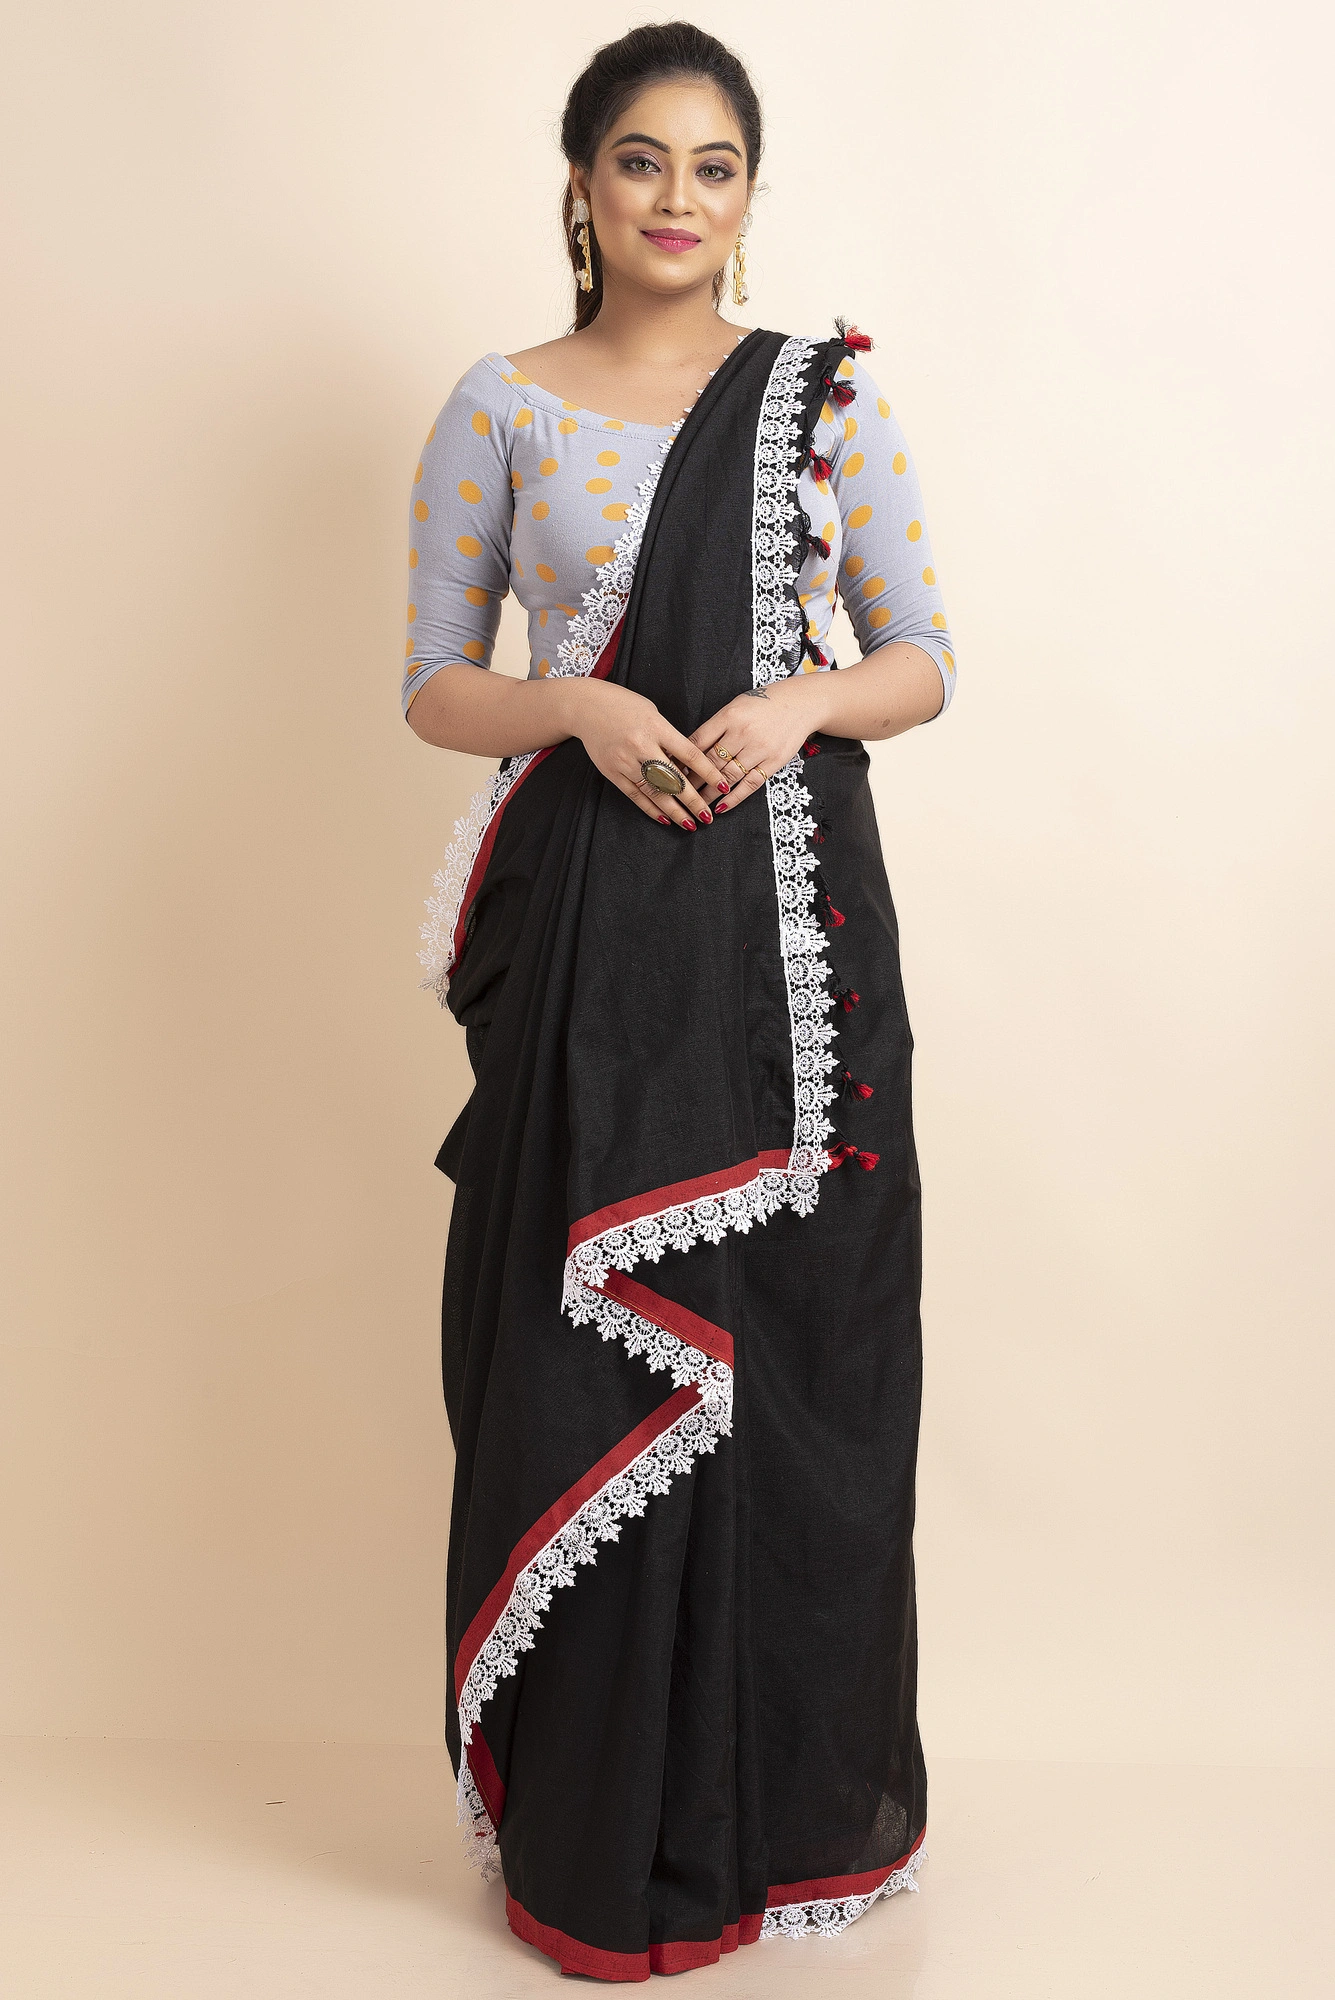 Black Red White Lace Border Cotton Handloom Saree with Blouse Piece-LAAMHCWBP035